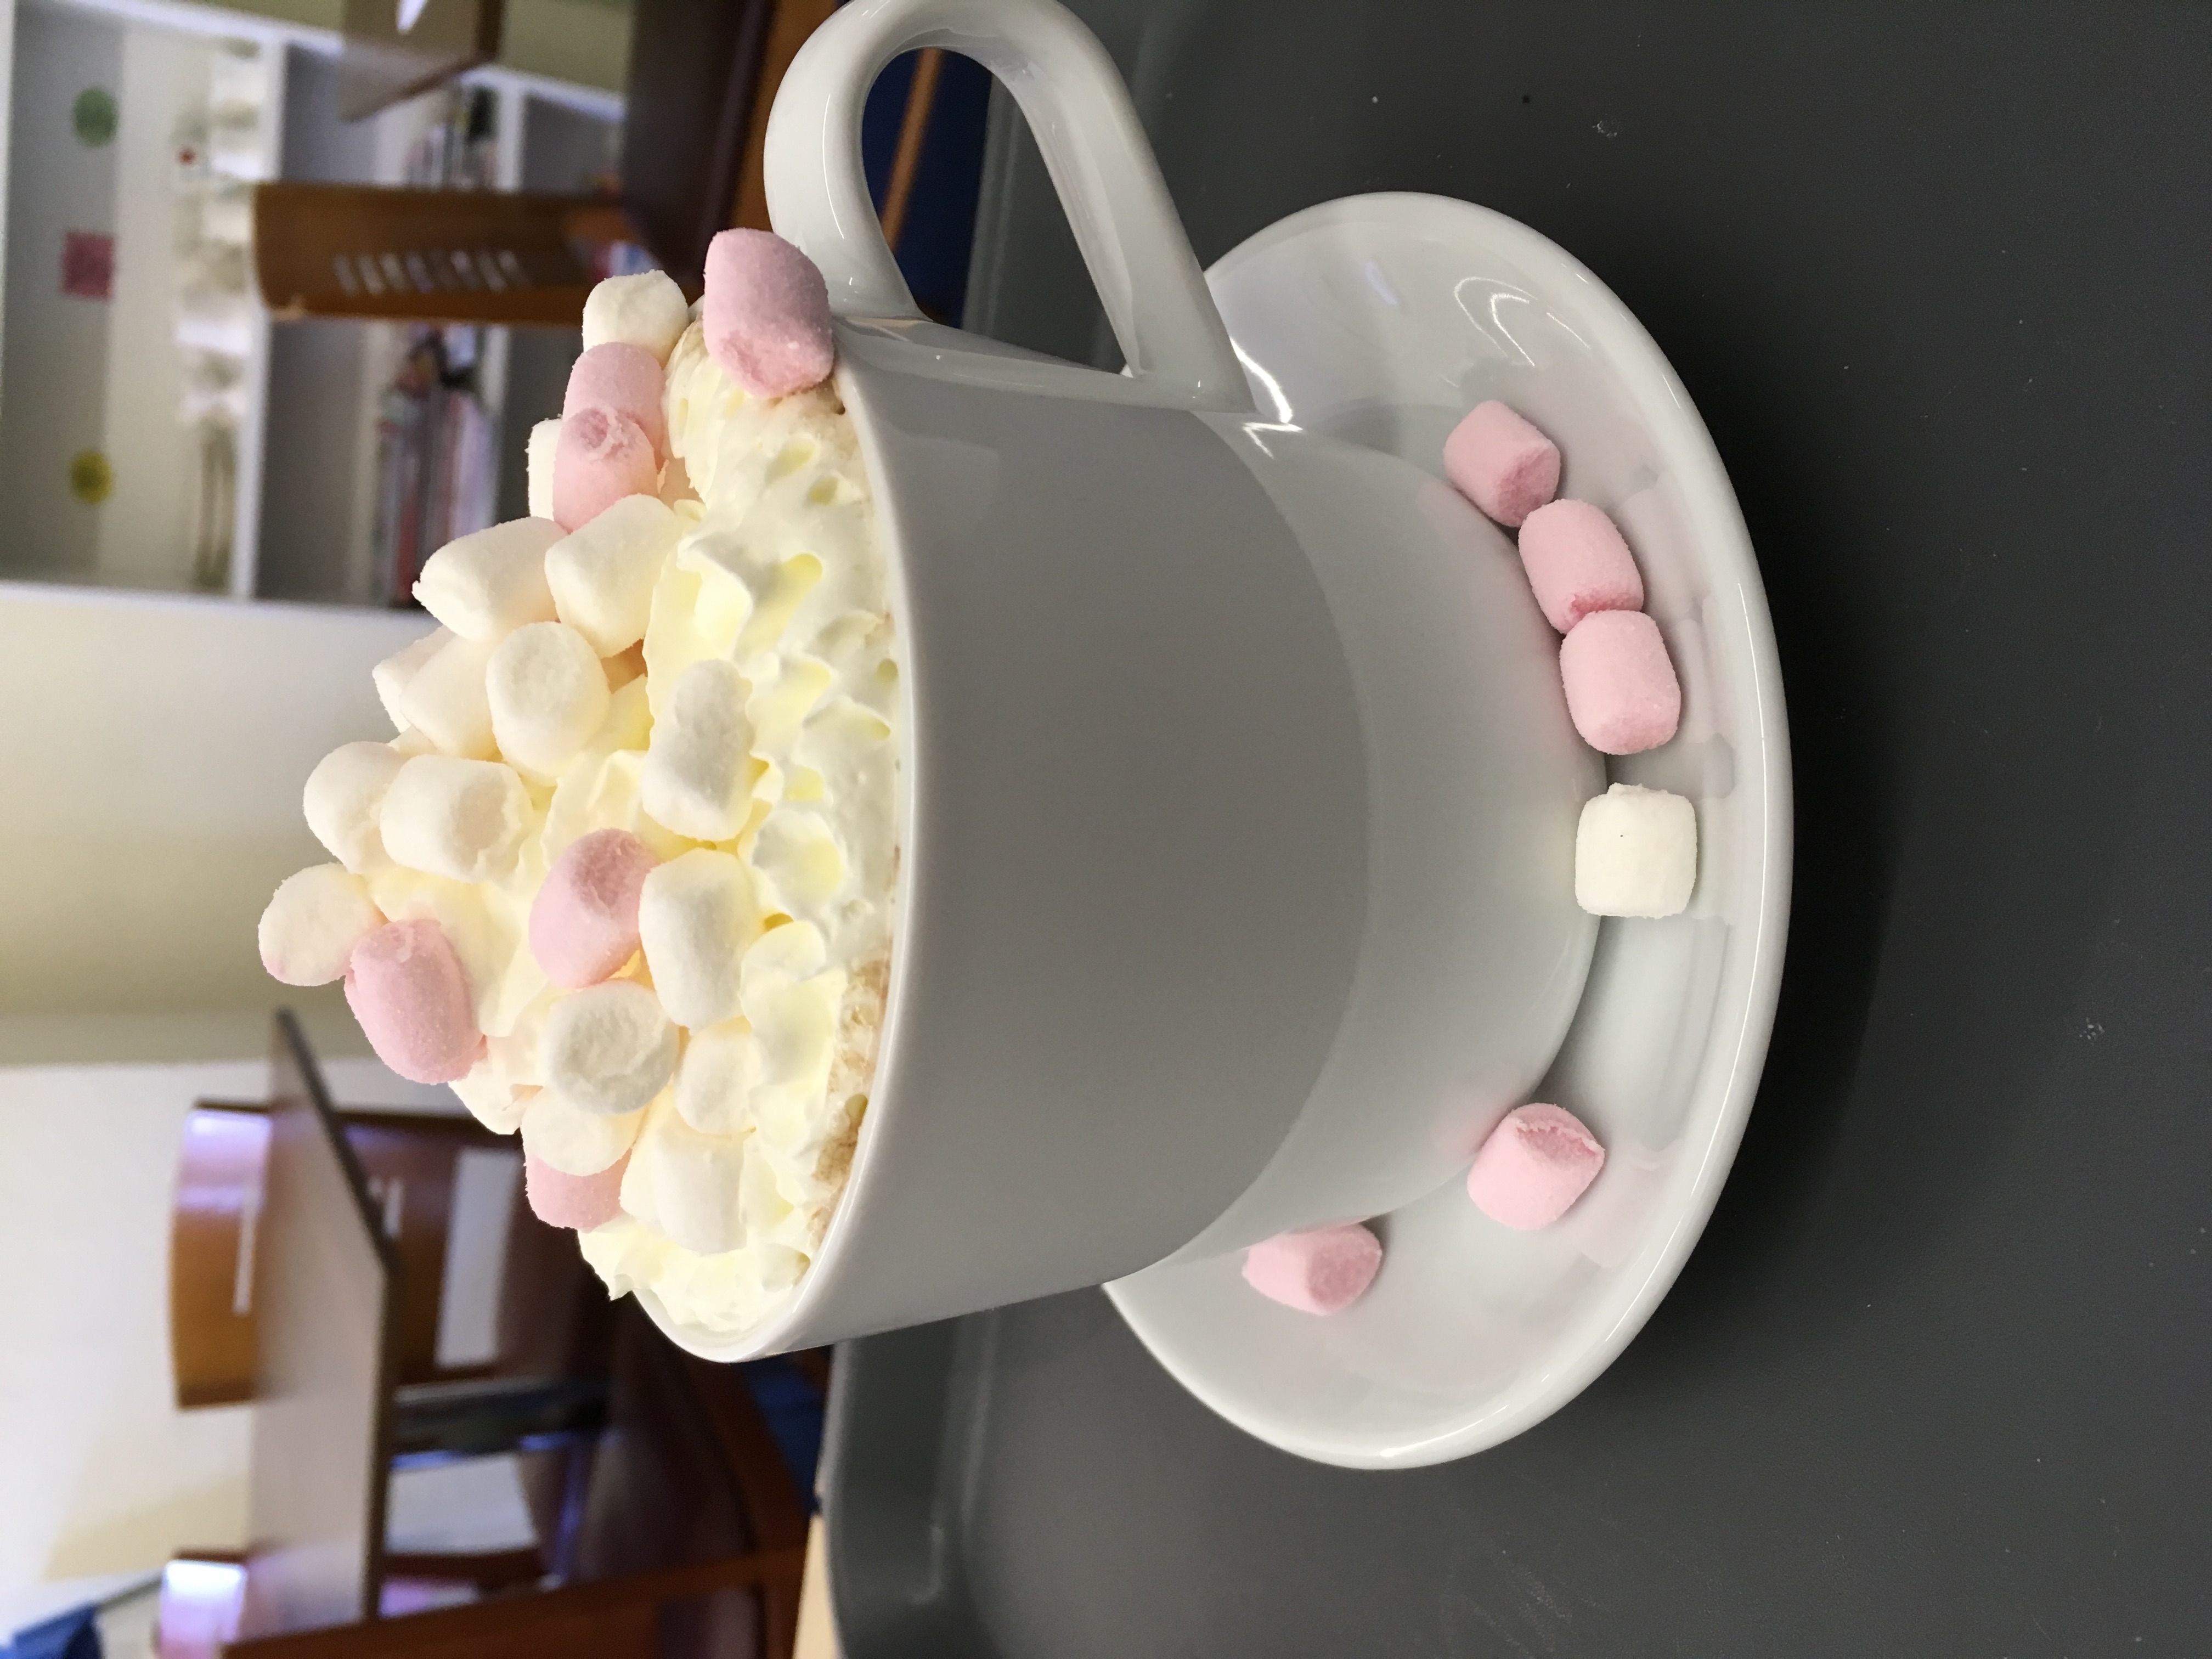 Hot Chocolate with Cream and Marshmallows